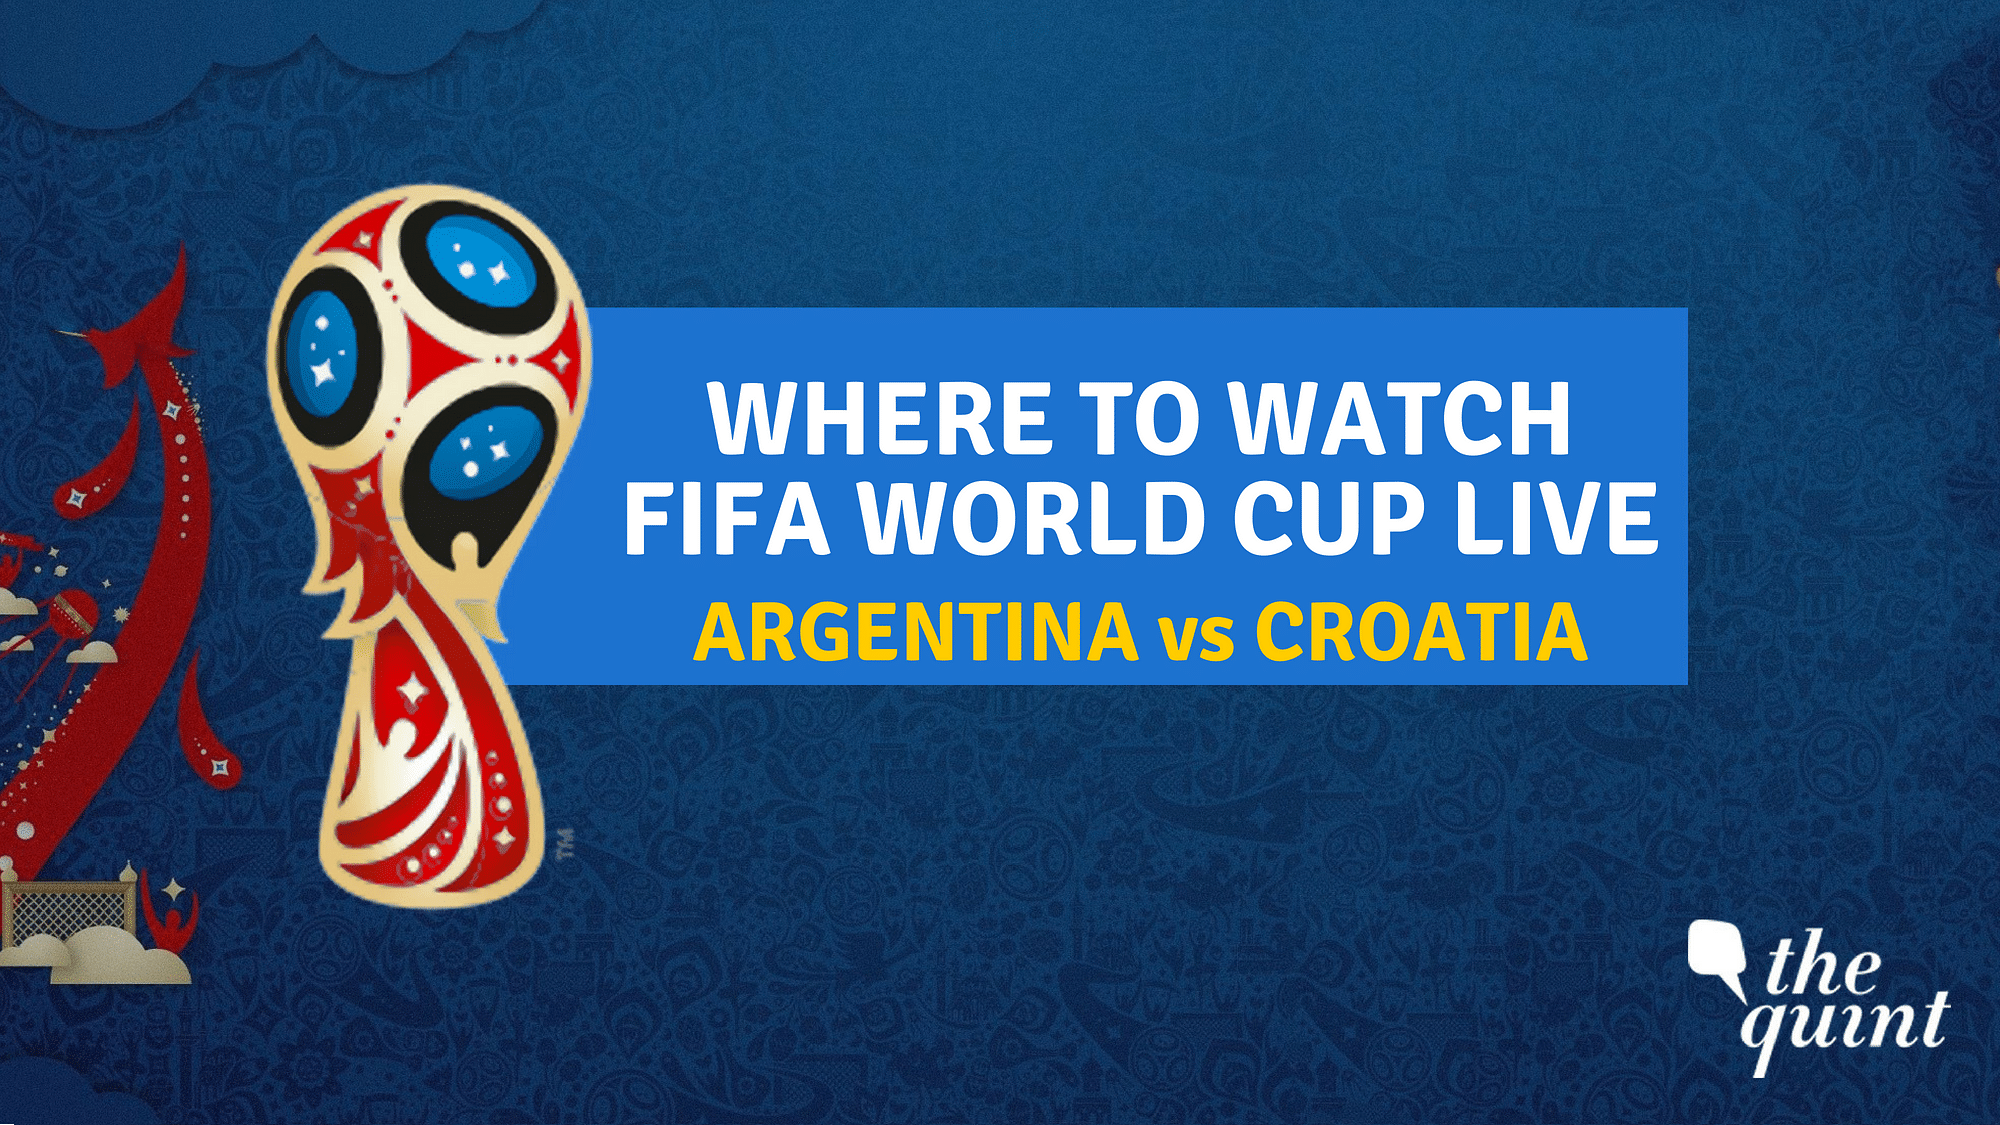 Argentina vs Croatia, FIFA World Cup 2018 Group D Match will be played on 21 June.